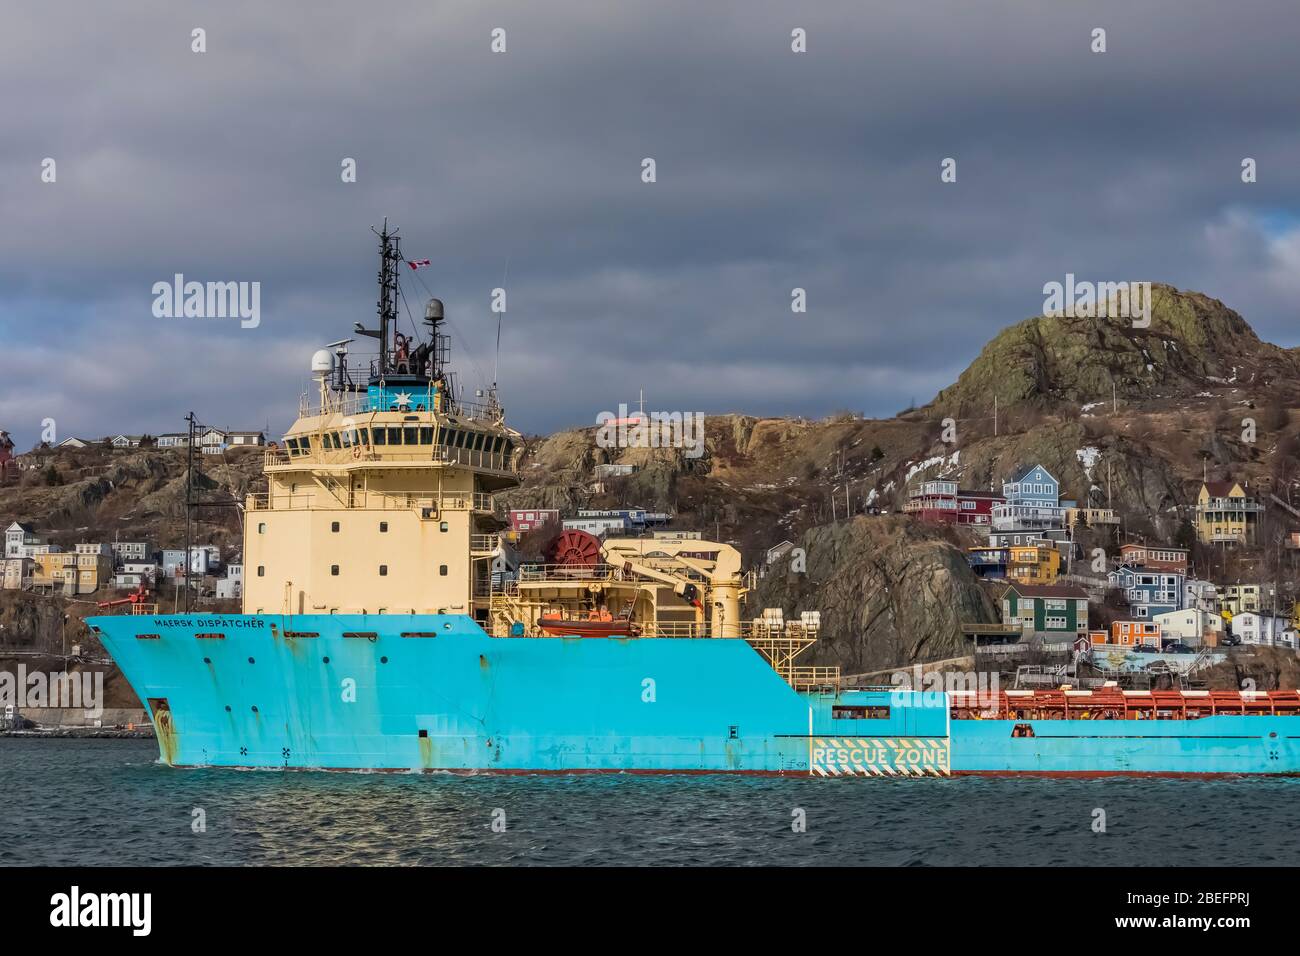 Maersk Dispatcher, an offshore tug and anchor handling supply vessel, passing The Battery, a colourful neighbourhood in St. John's, Newfoundland, Cand Stock Photo